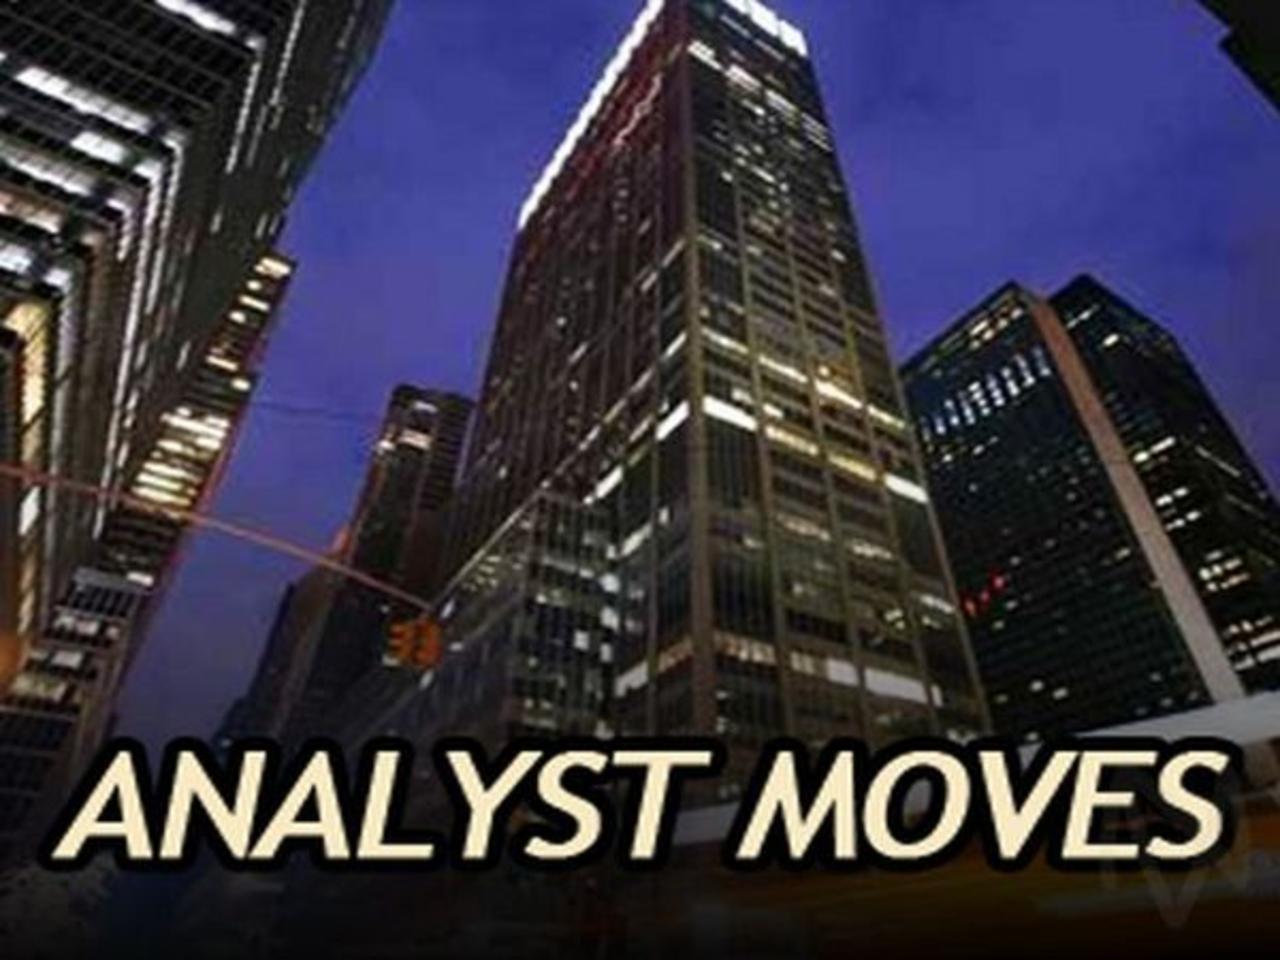 S&P 500 Analyst Moves: FBHS